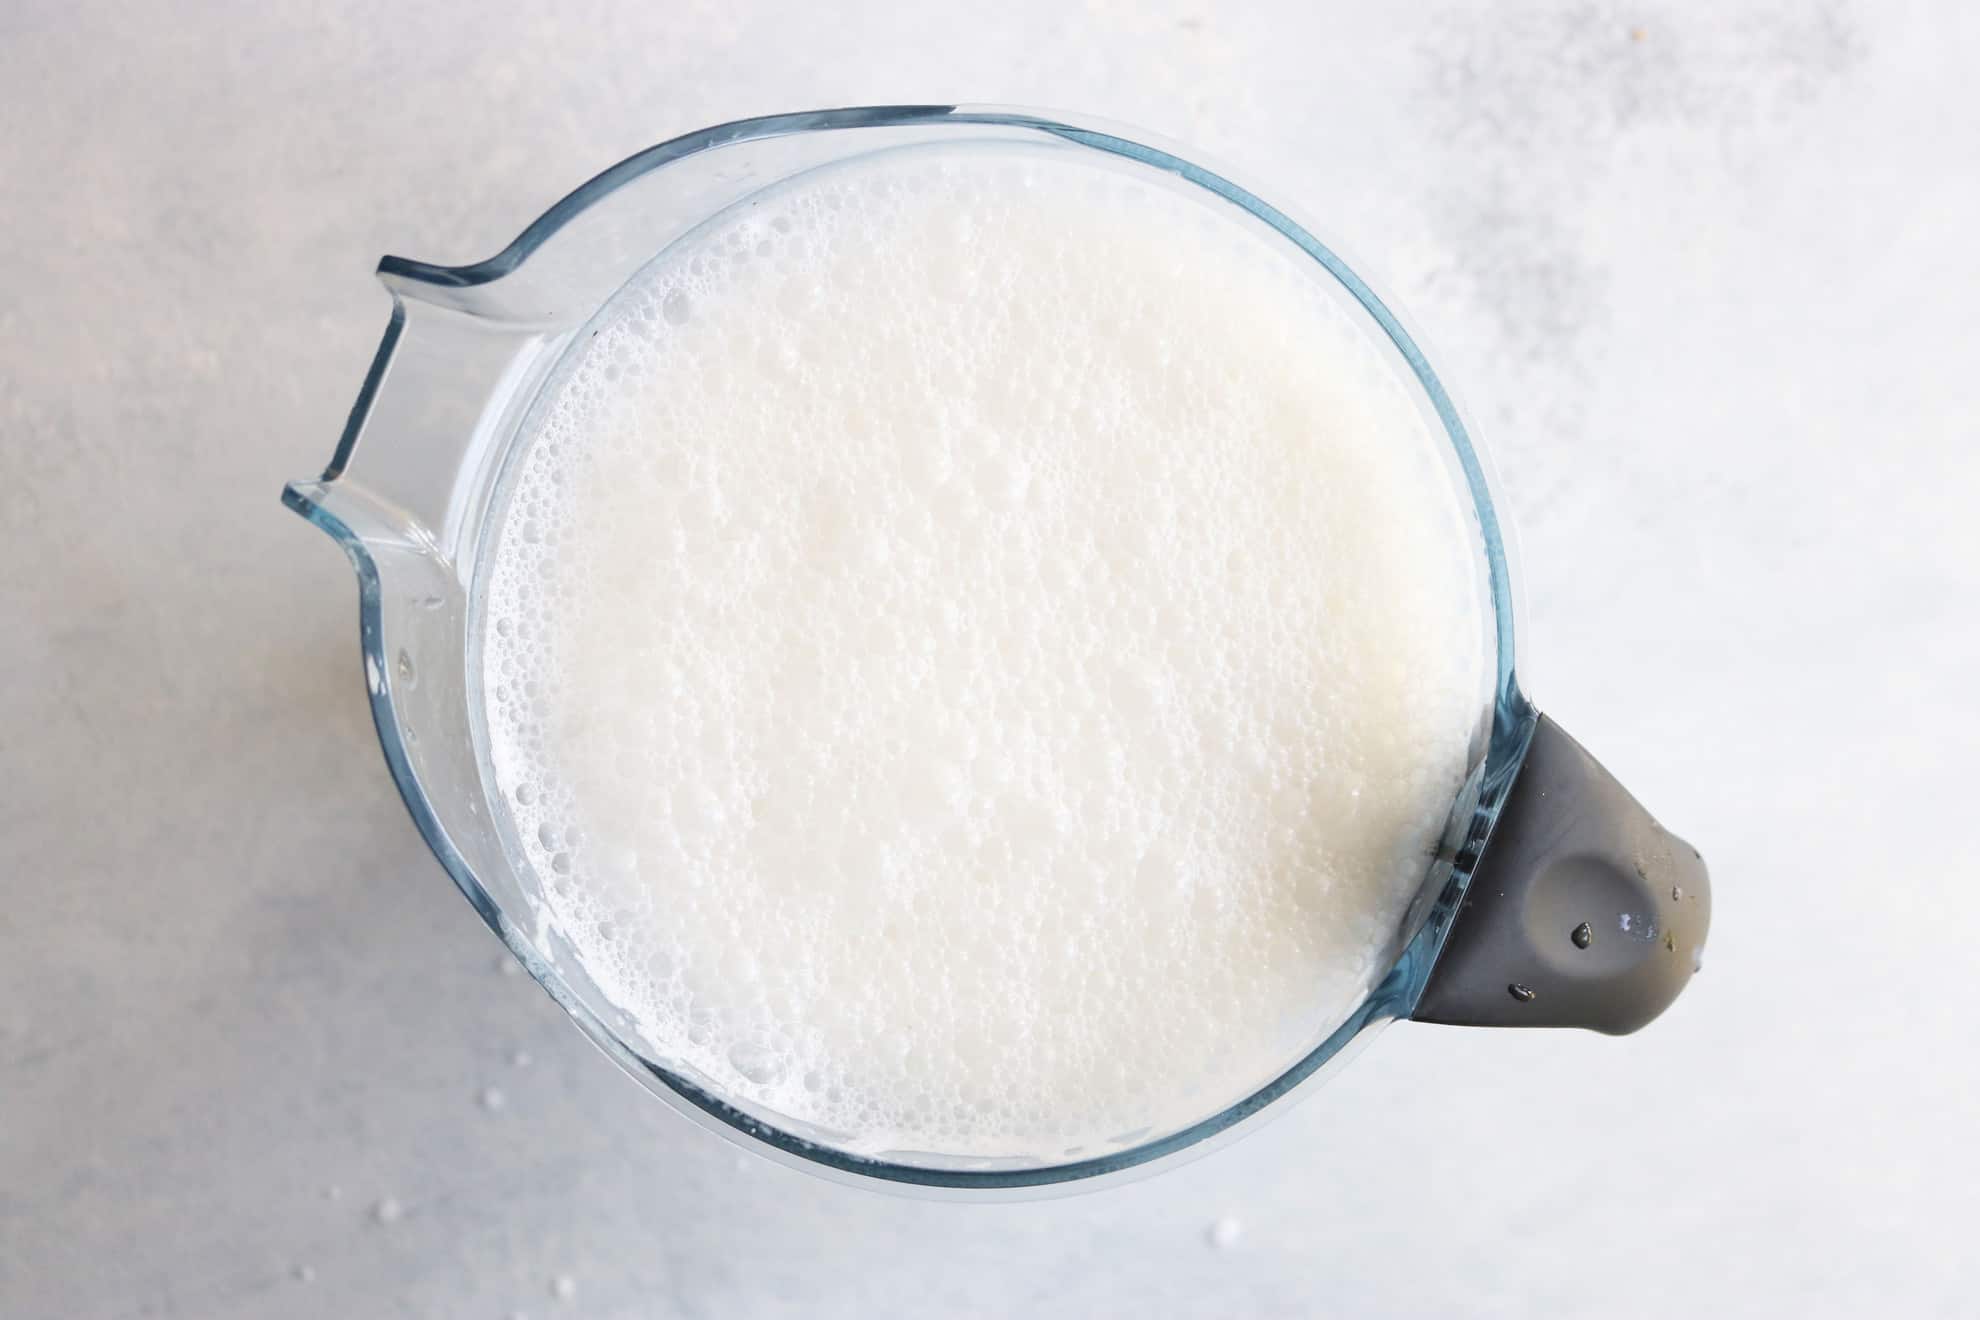 This is an overhead image of a blender with blended milk. The milk has a lot of bubbles. The blender sits on a light grey surface.